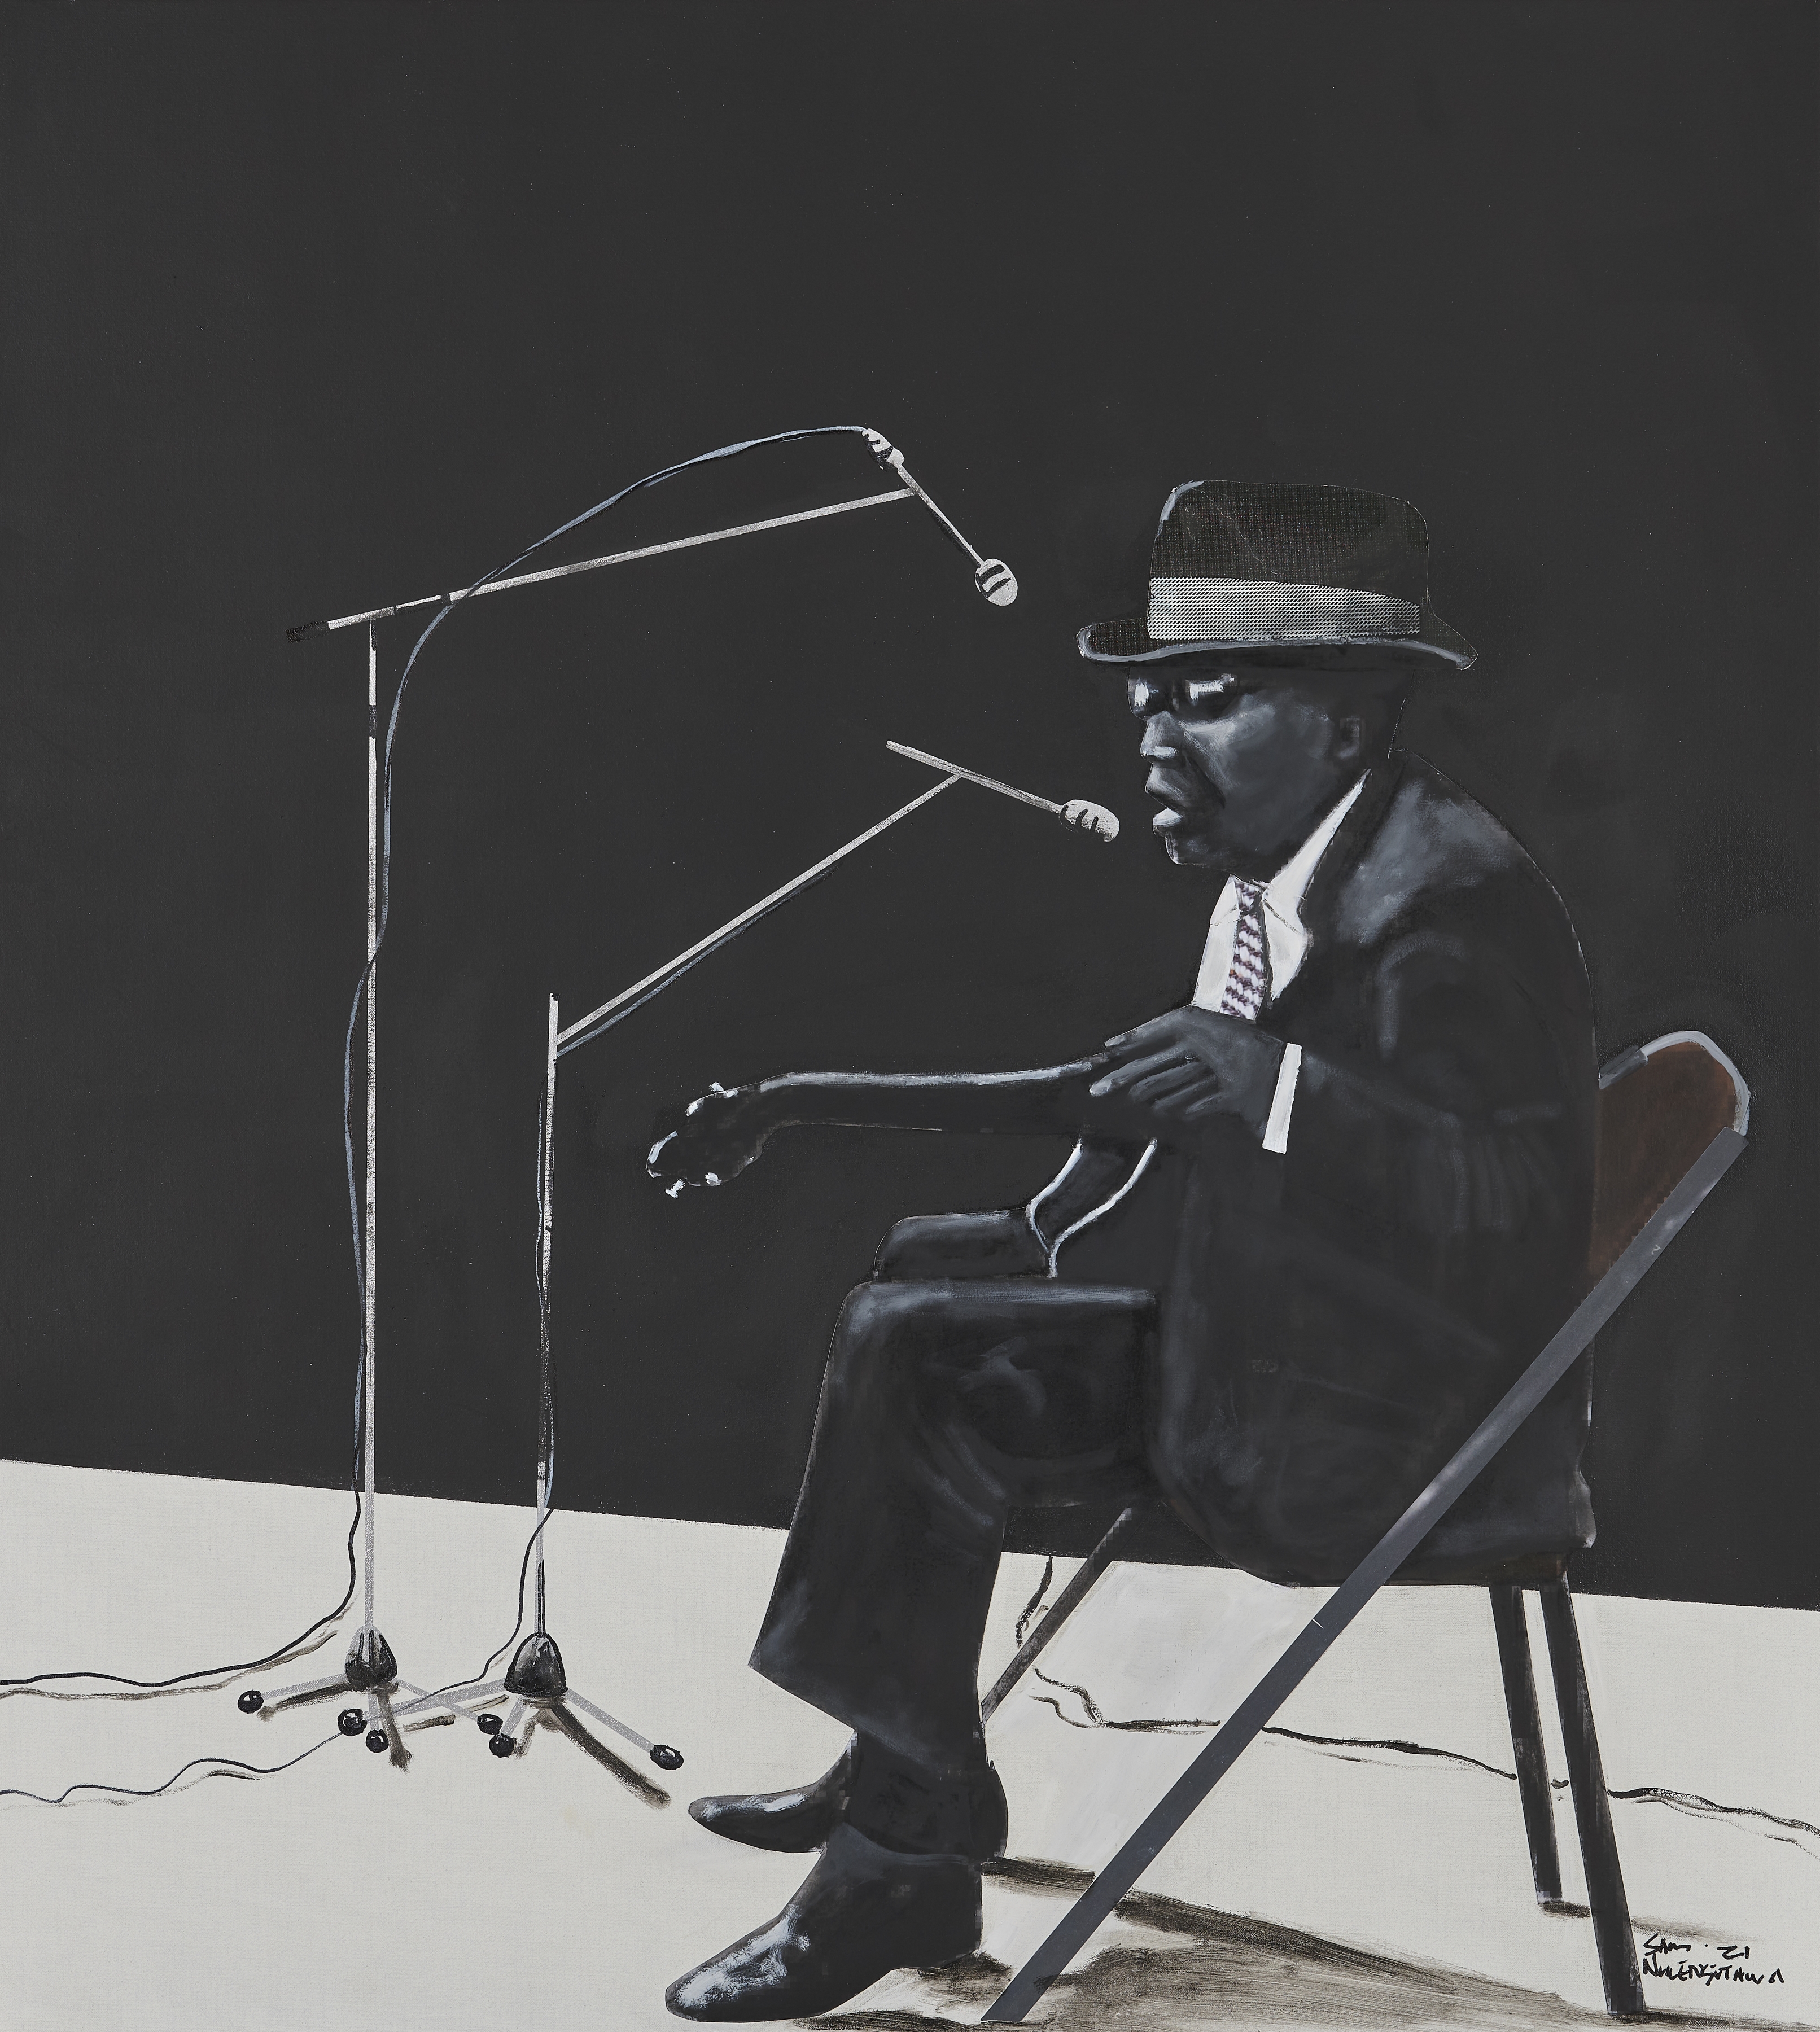 John Lee Hooker, 2021
Mixed media collage on canvas
100.5 x 90.5 x 10 cm
Enquire
&amp;nbsp;